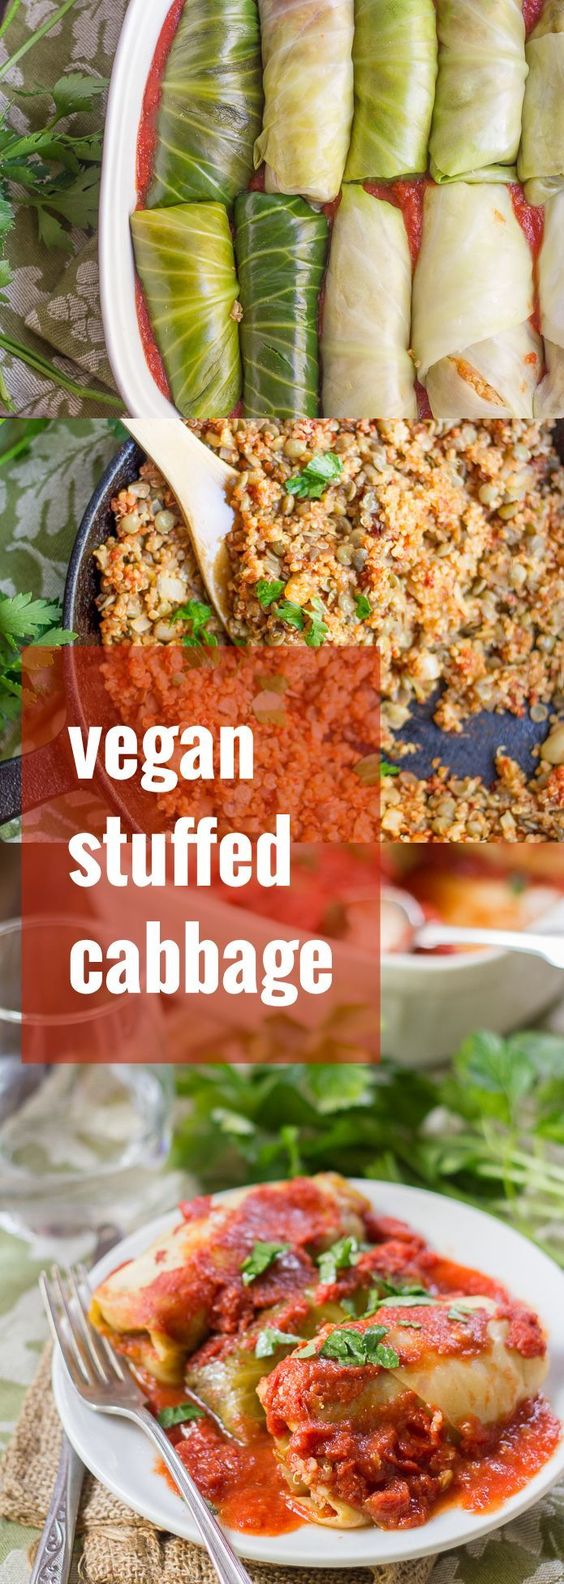 These stuffed vegan cabbage rolls are made with tender leaves of steamed cabbage wrapped around a savory, smoky mixture of quinoa and lentils, baked up in tomato sauce until piping hot.